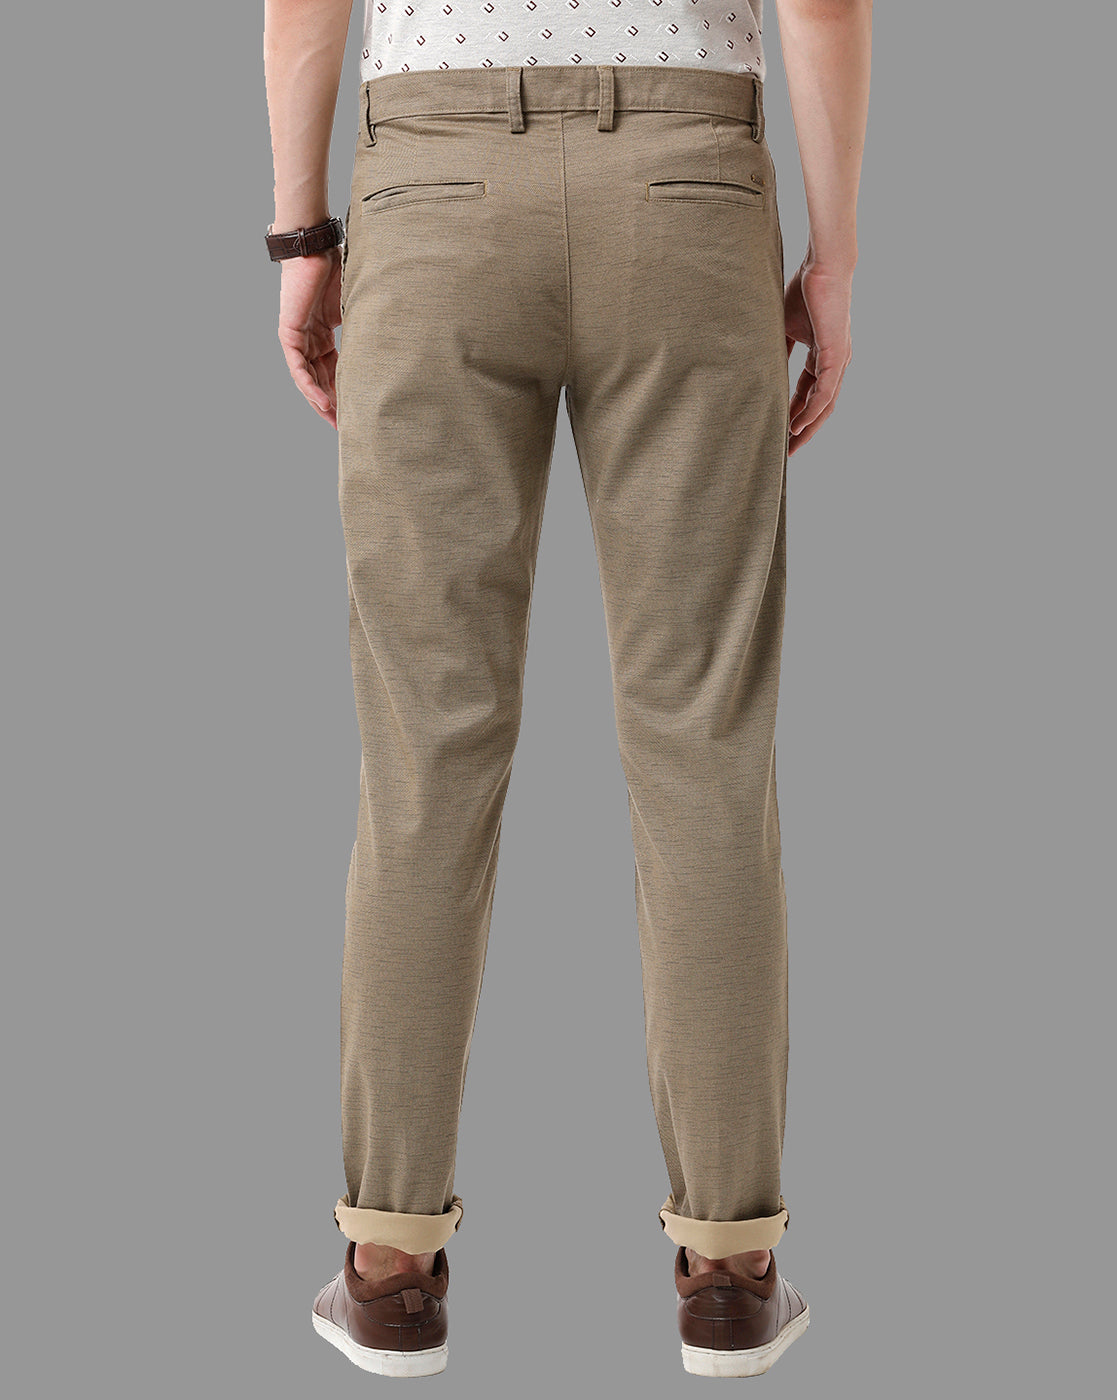 Casual Trousers in Light Khaki colour - urban clothing co.